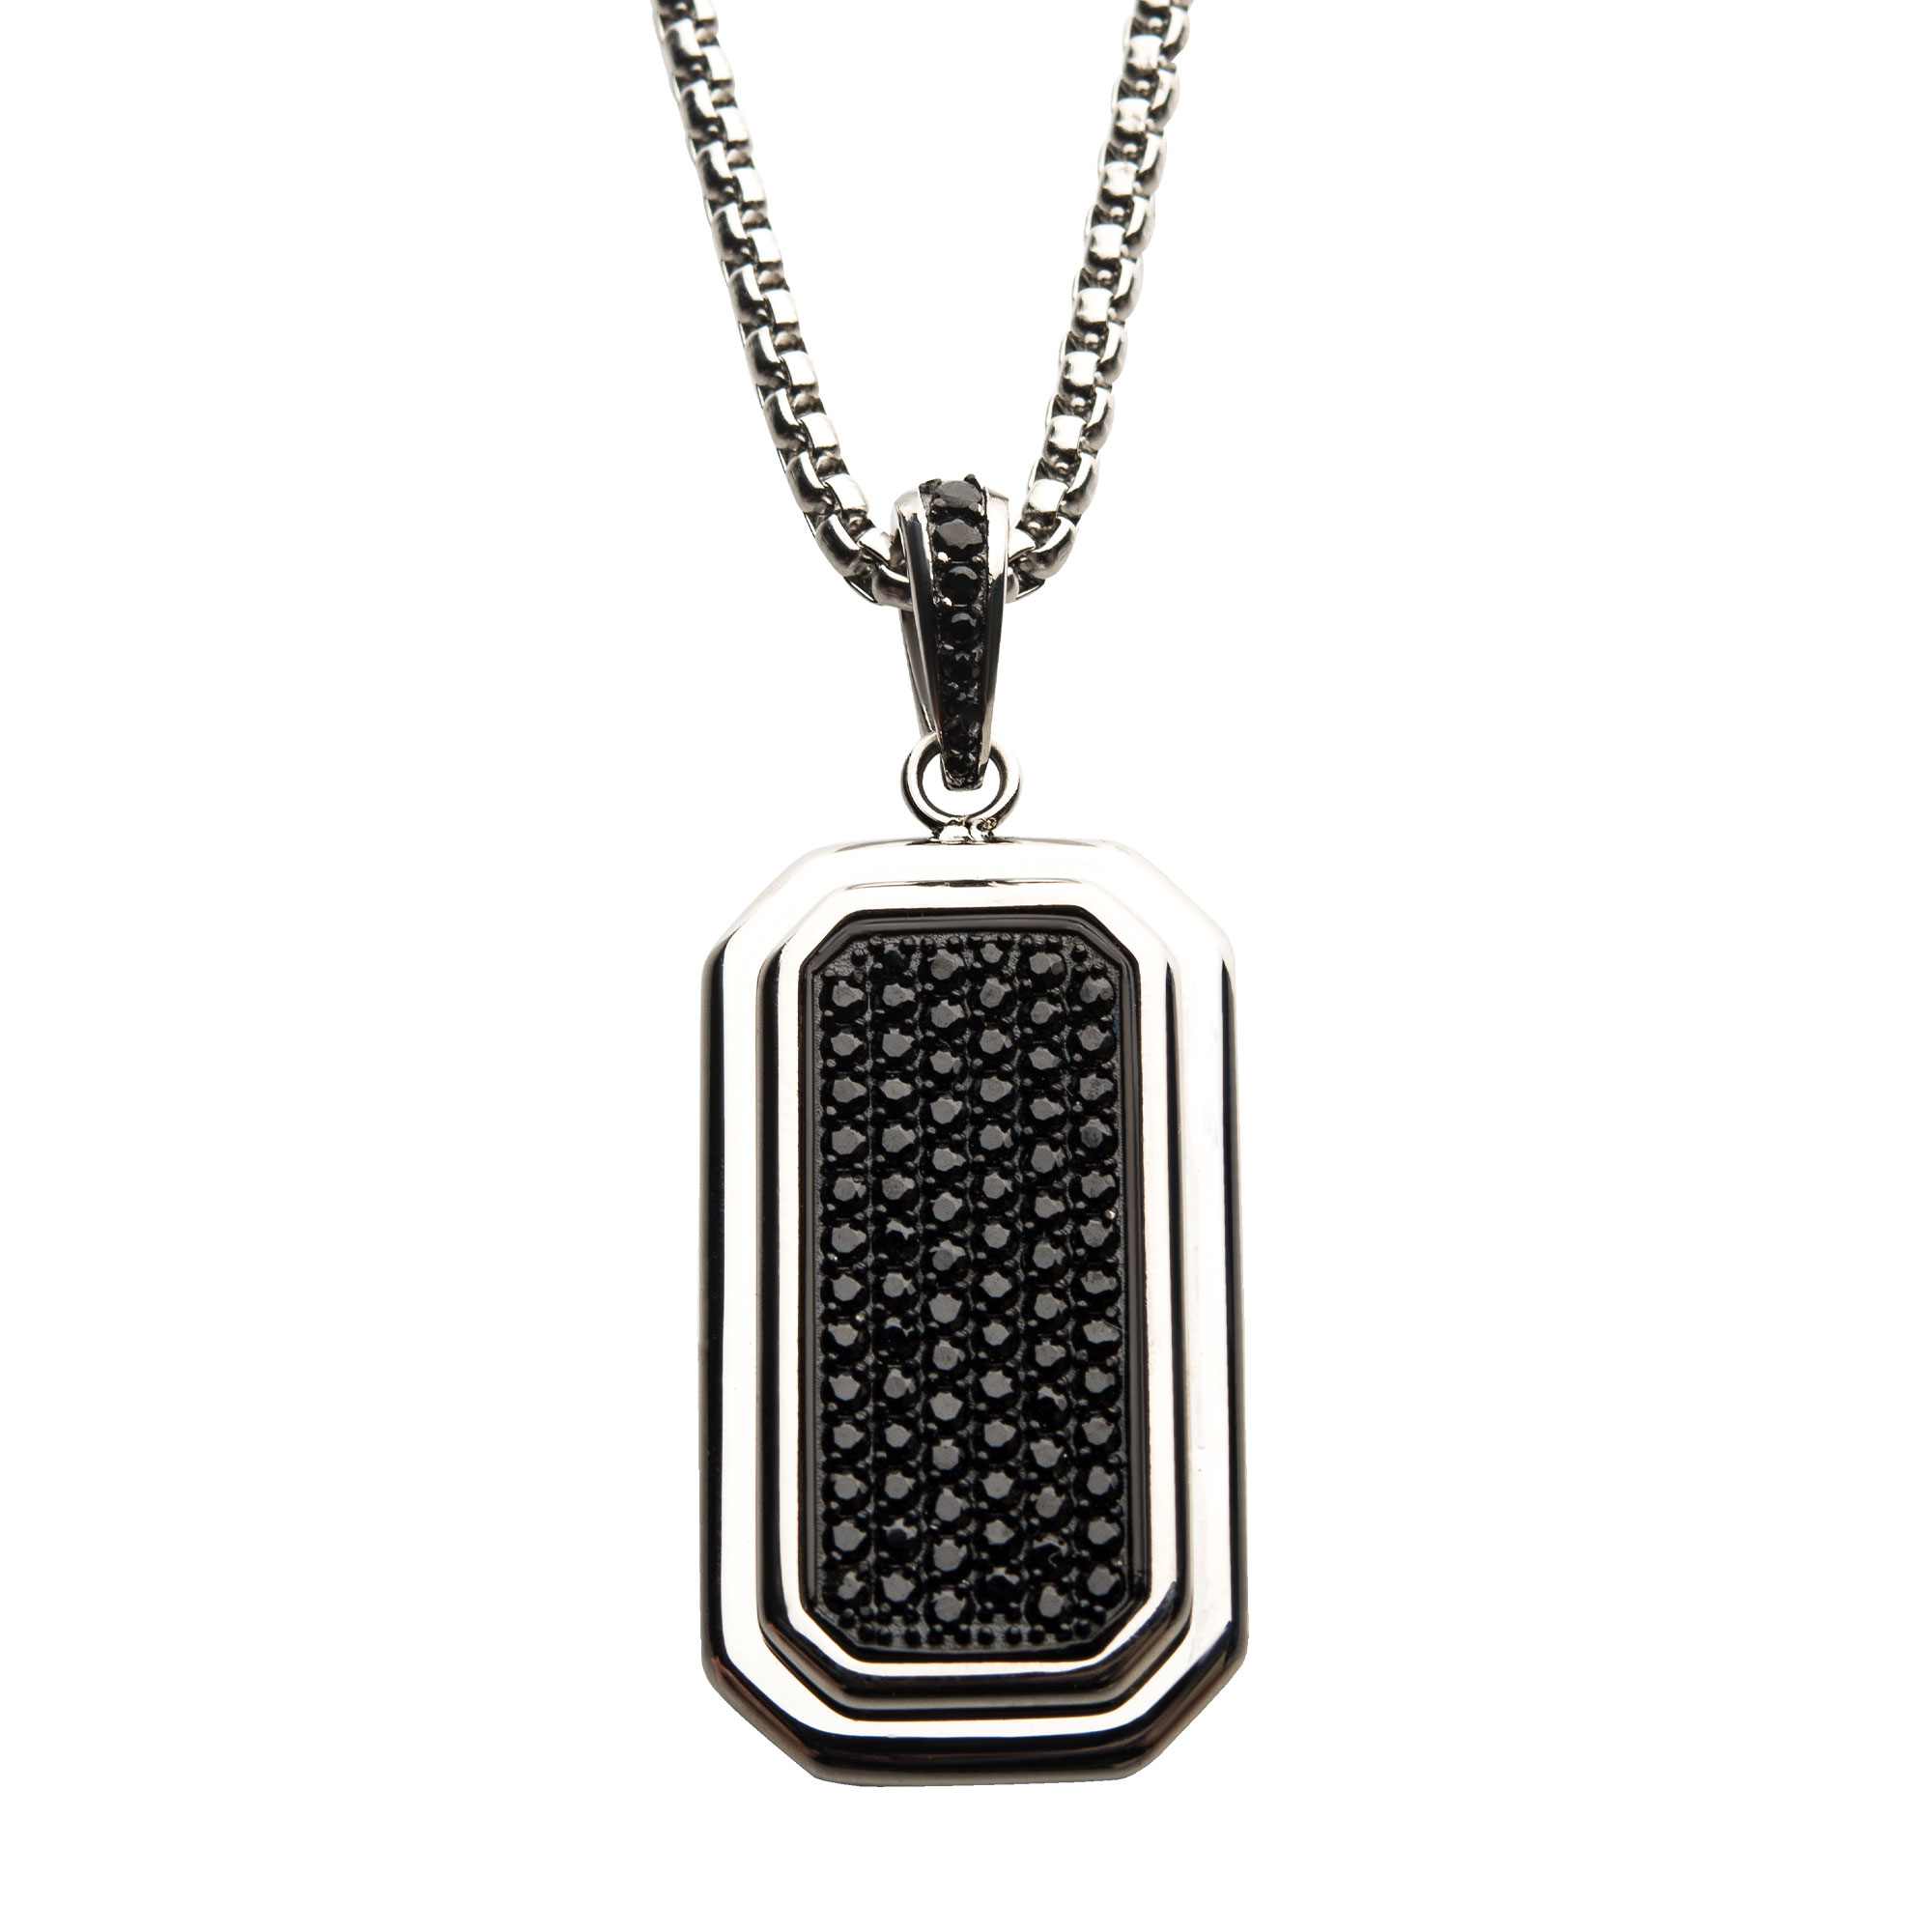 Stainless Steel Dog Tag Pendant with Black CZ Inlay, with Steel Box Chain Enchanted Jewelry Plainfield, CT